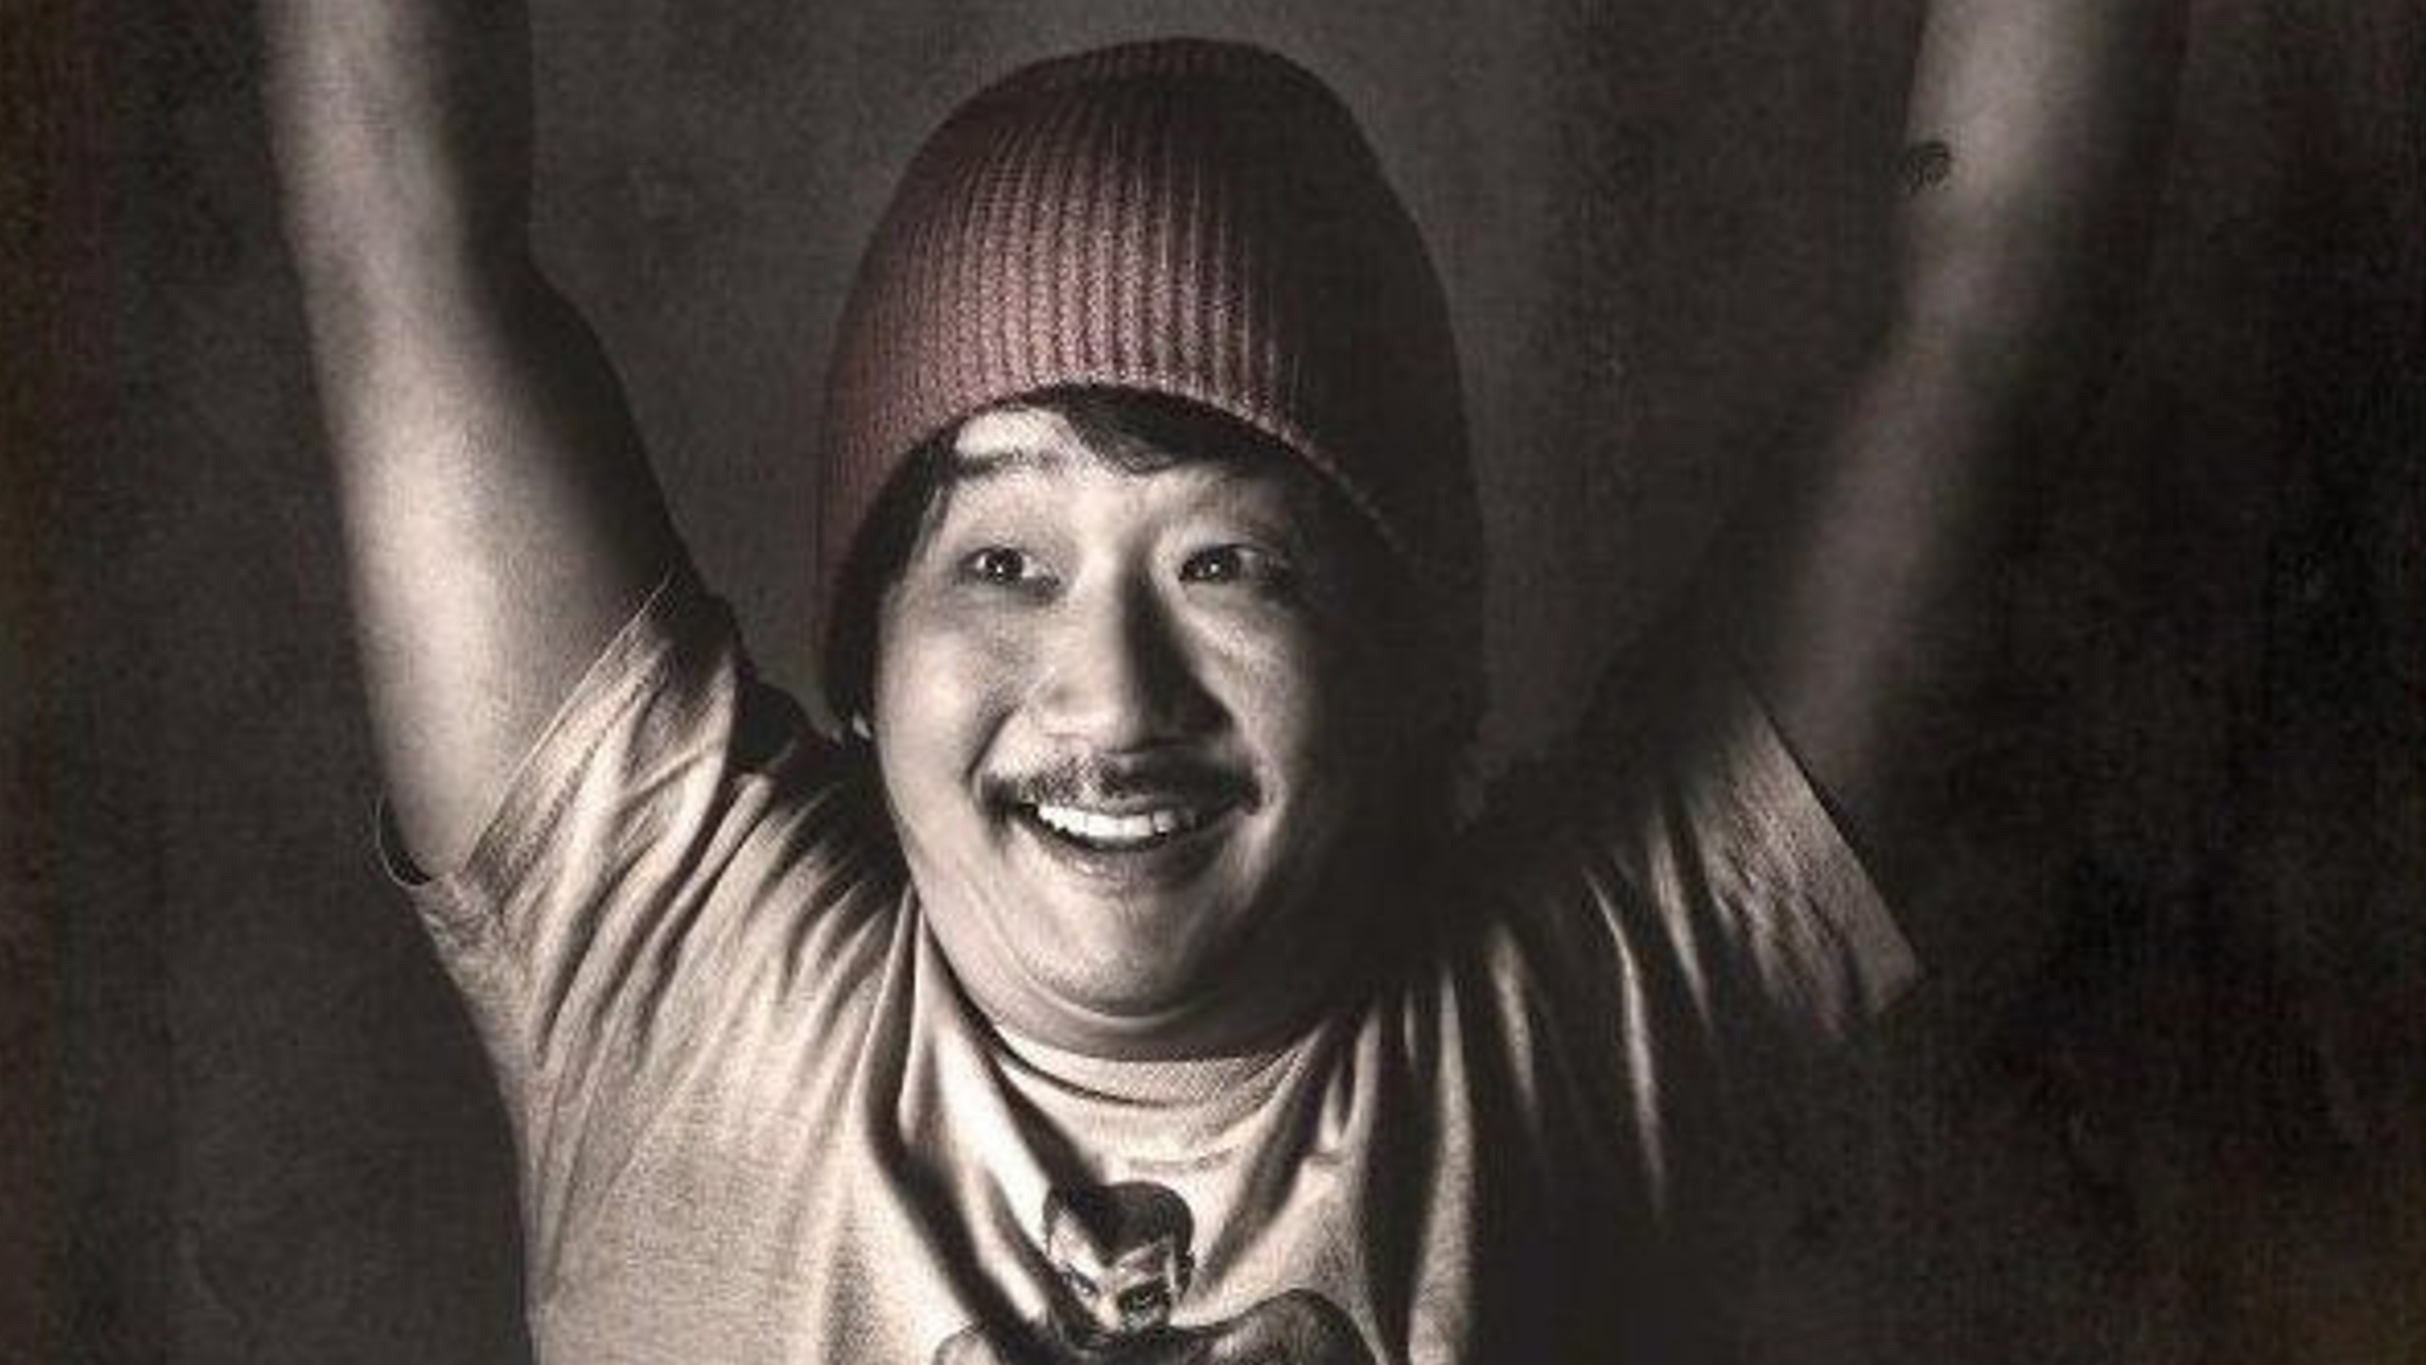 Tonight at the Improv ft. Bobby Lee, Craig Robinson, Mike Binder, Jimmy Shin, Kristy Quinn and more TBA!